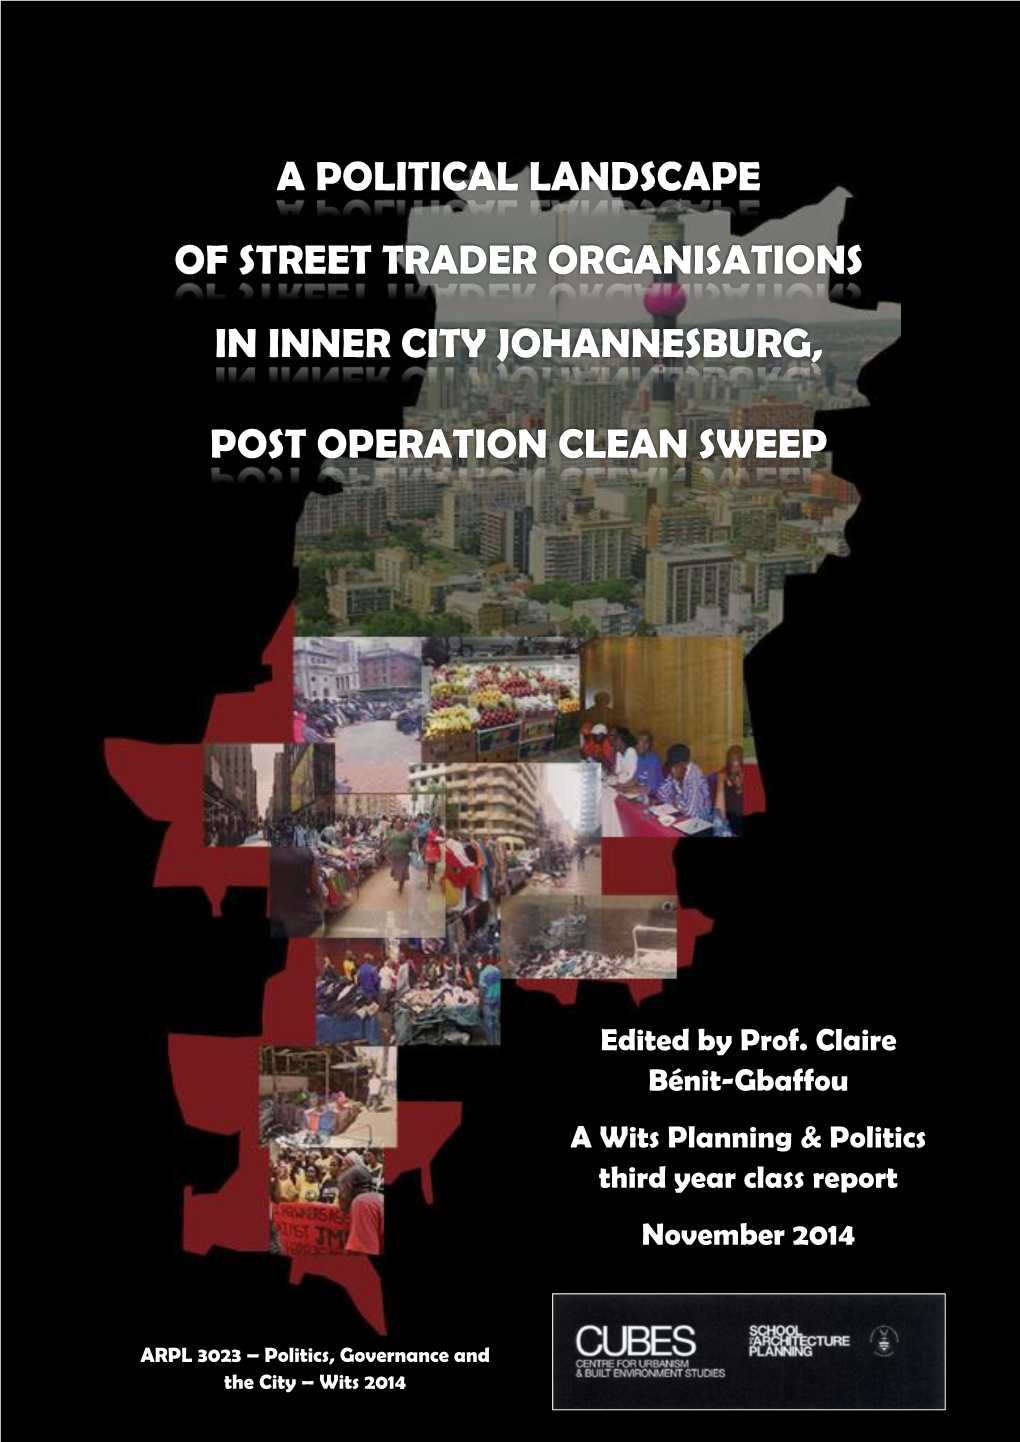 A Political Landscape of Street Trader Organisations in Inner City Johannesburg, Post Operation Clean Sweep